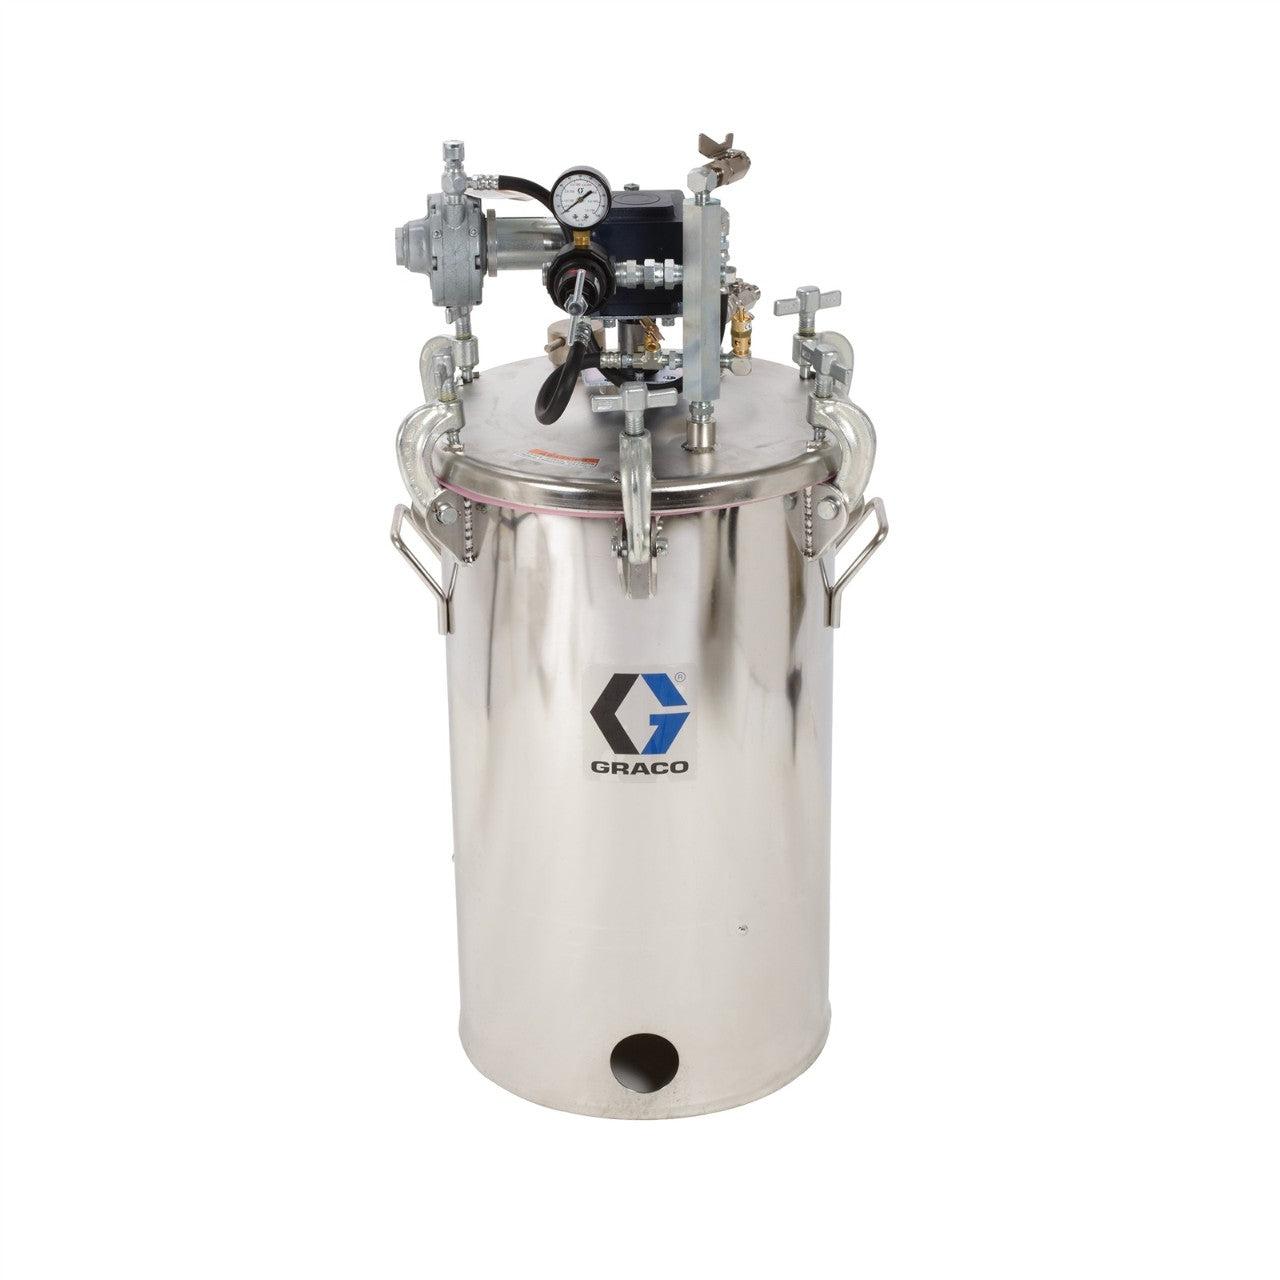 10 Gallon Low Pressure (HVLP) Pot with Agitator, Regulated to 15 psi, ASME Rated, 33.9 in (88 cm), 85 lbs (39 kg), SST